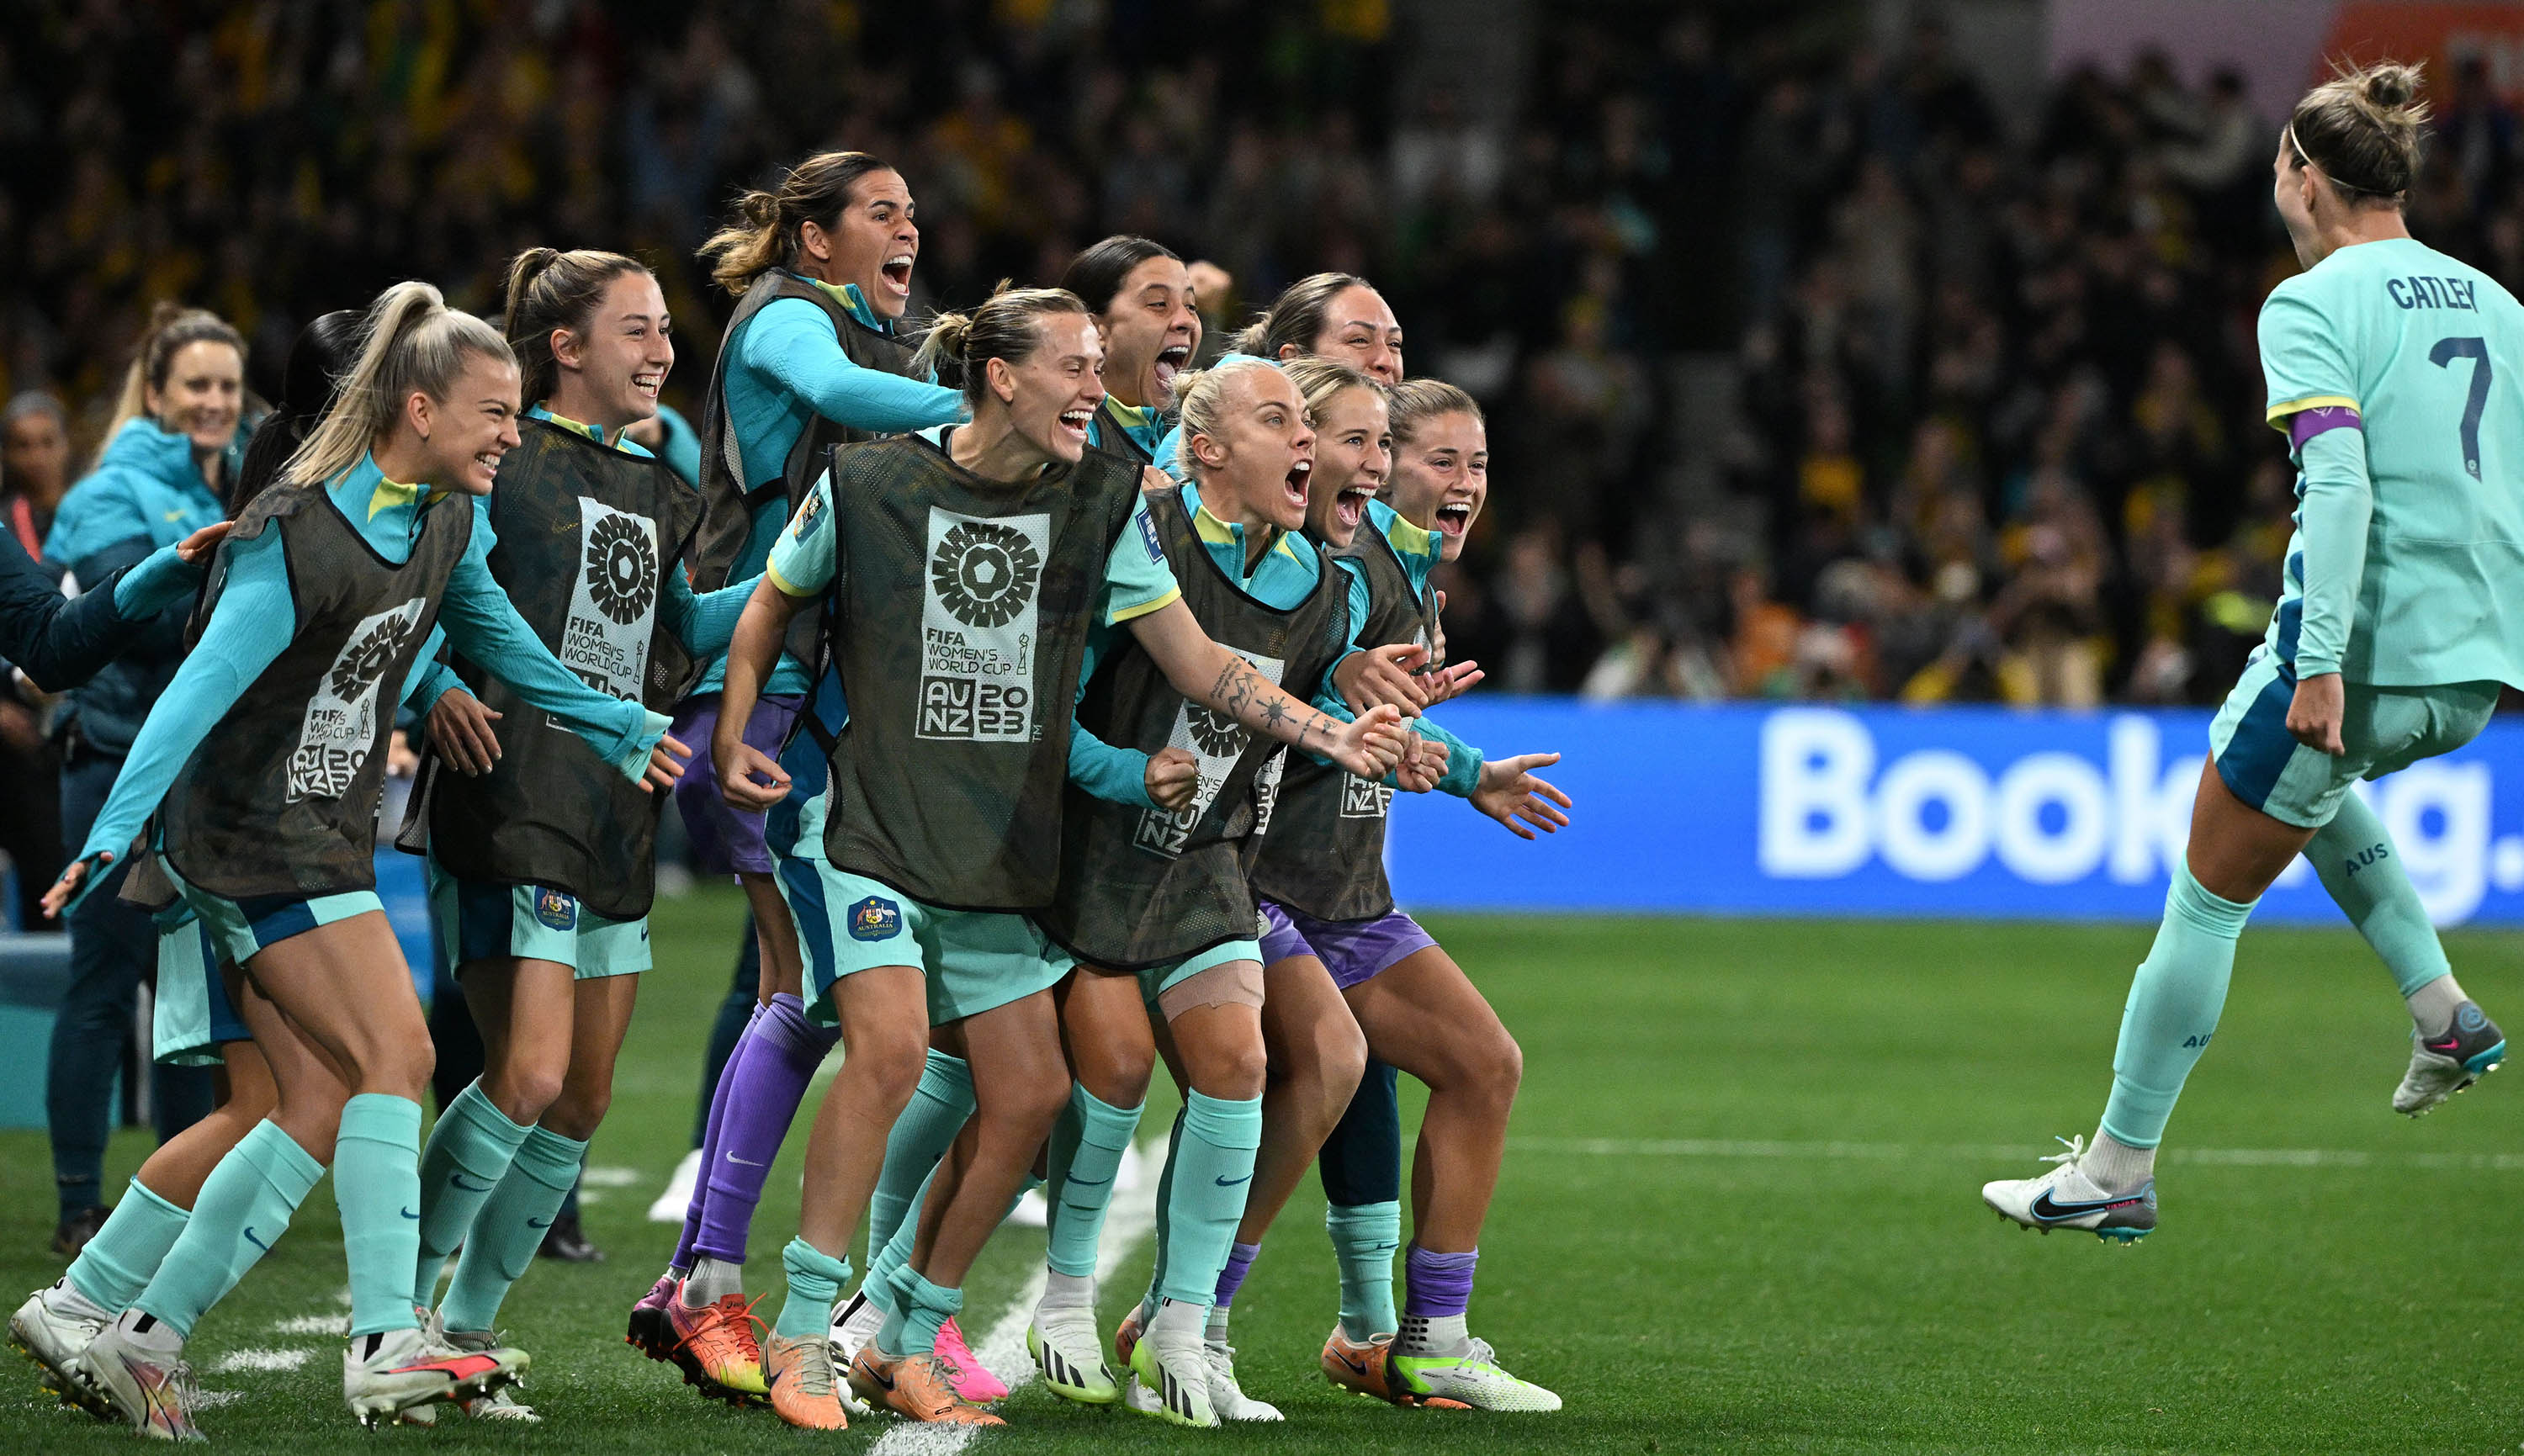 Australia's defender Stephanie Catley, right, celebrates with teammates after scoring her team's fourth goal from the penalty kick during the match between Canada and Australia at Melbourne Rectangular Stadium, in Melbourne, Australia, on July 31.